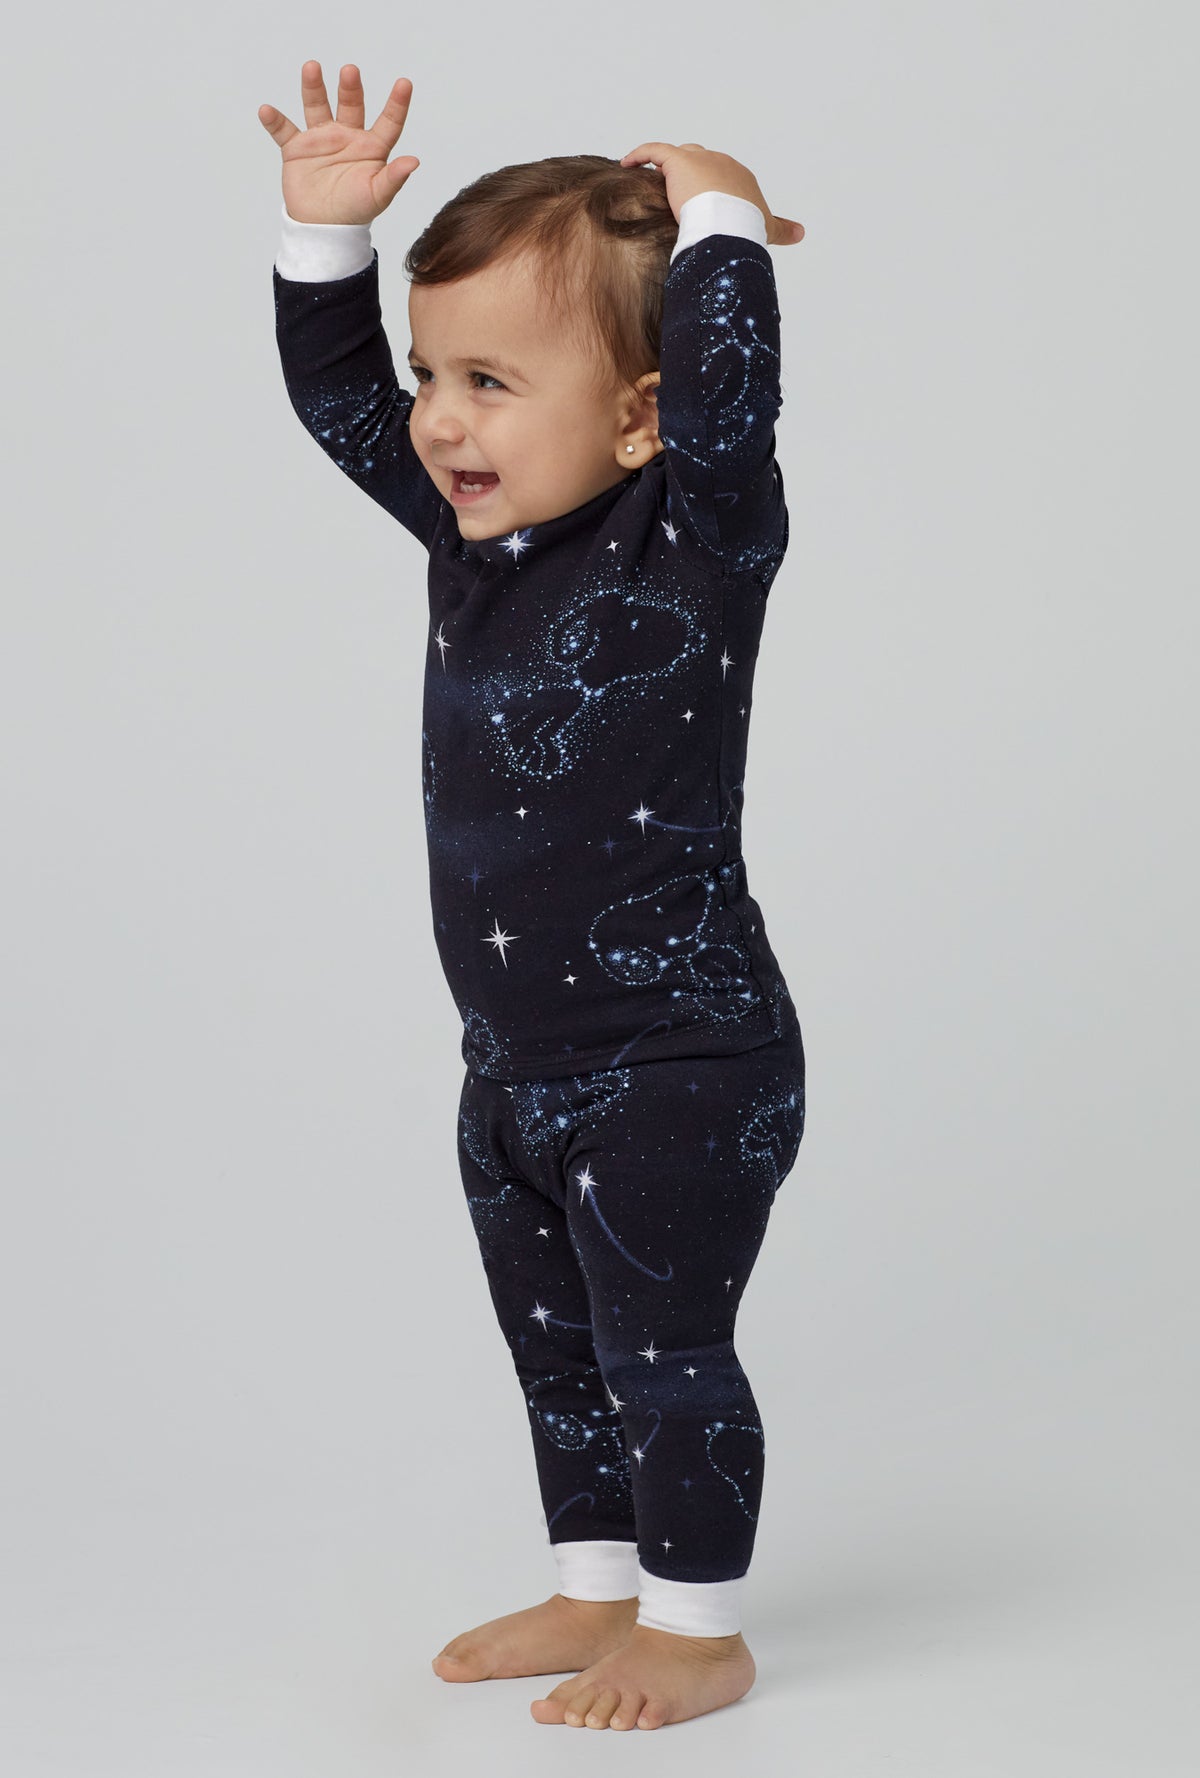 A baby wearing black long sleeve stretch jersey boo boo pj set with celestial snoopy print.